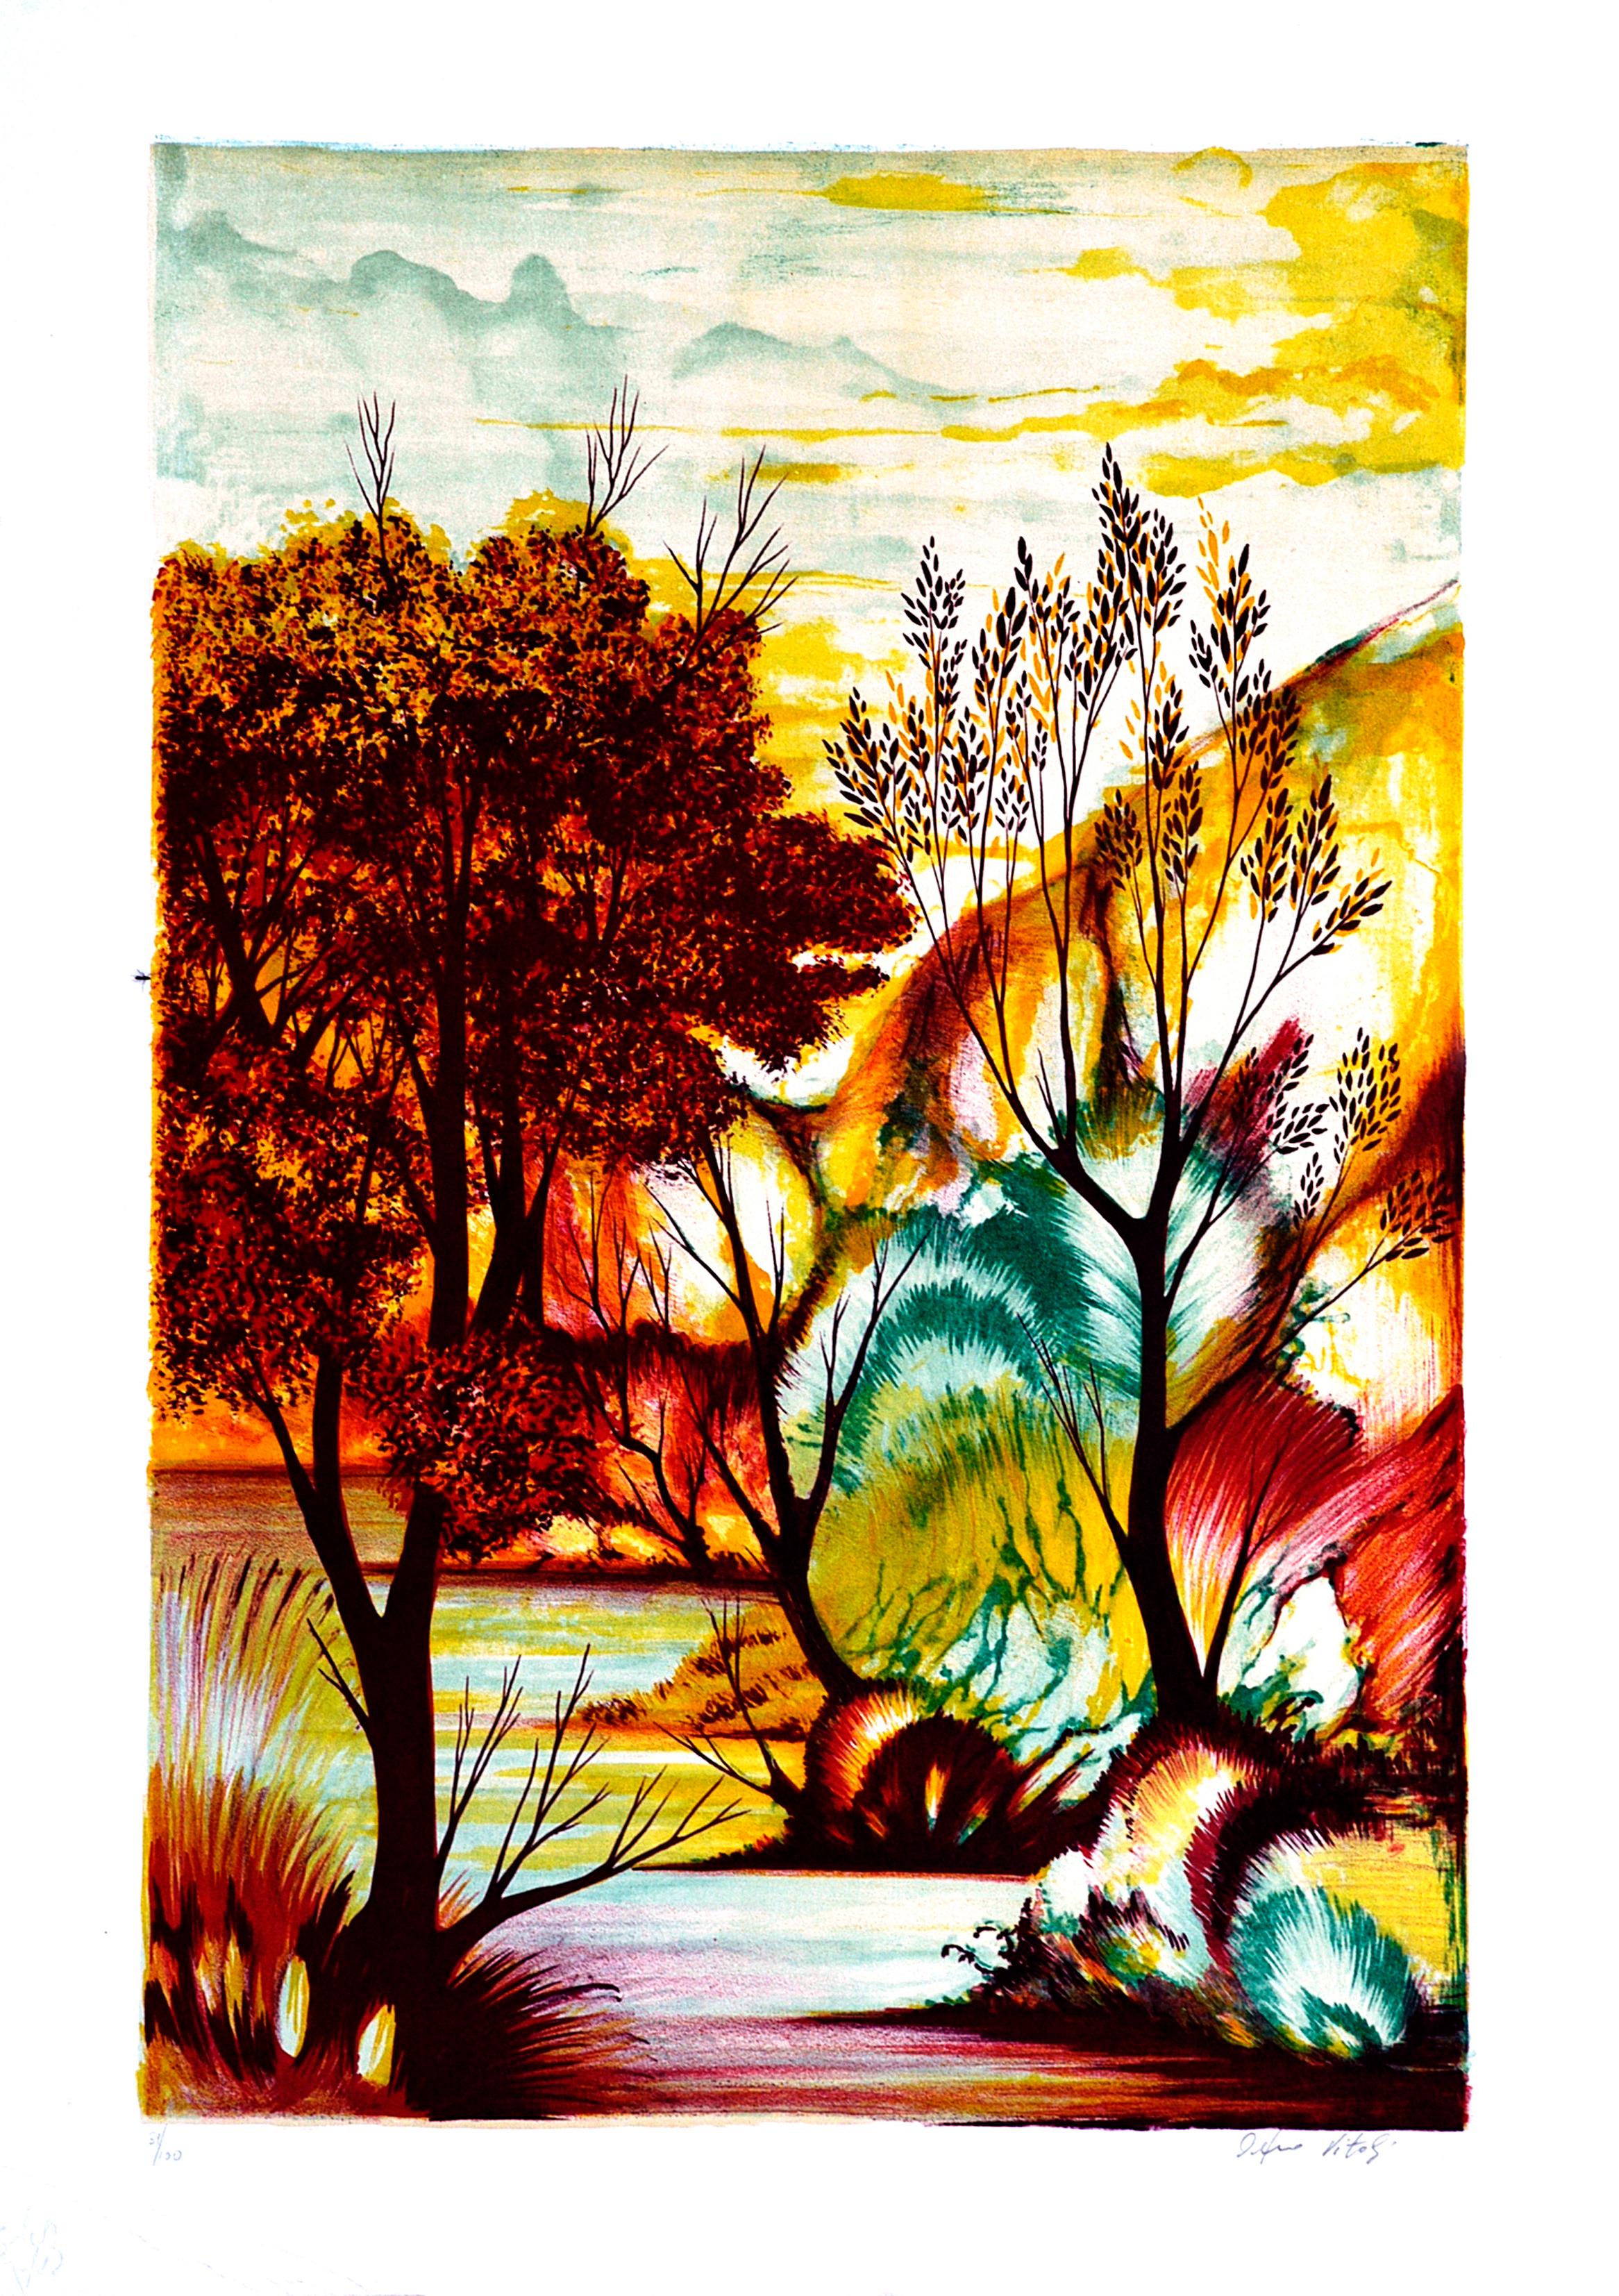 Edition of 100 prints, hand signed. Beautiful representation of Autumn colors, designed by the italian artist Orfeo Vitali and printed by Atelier Franco Cioppi.	
